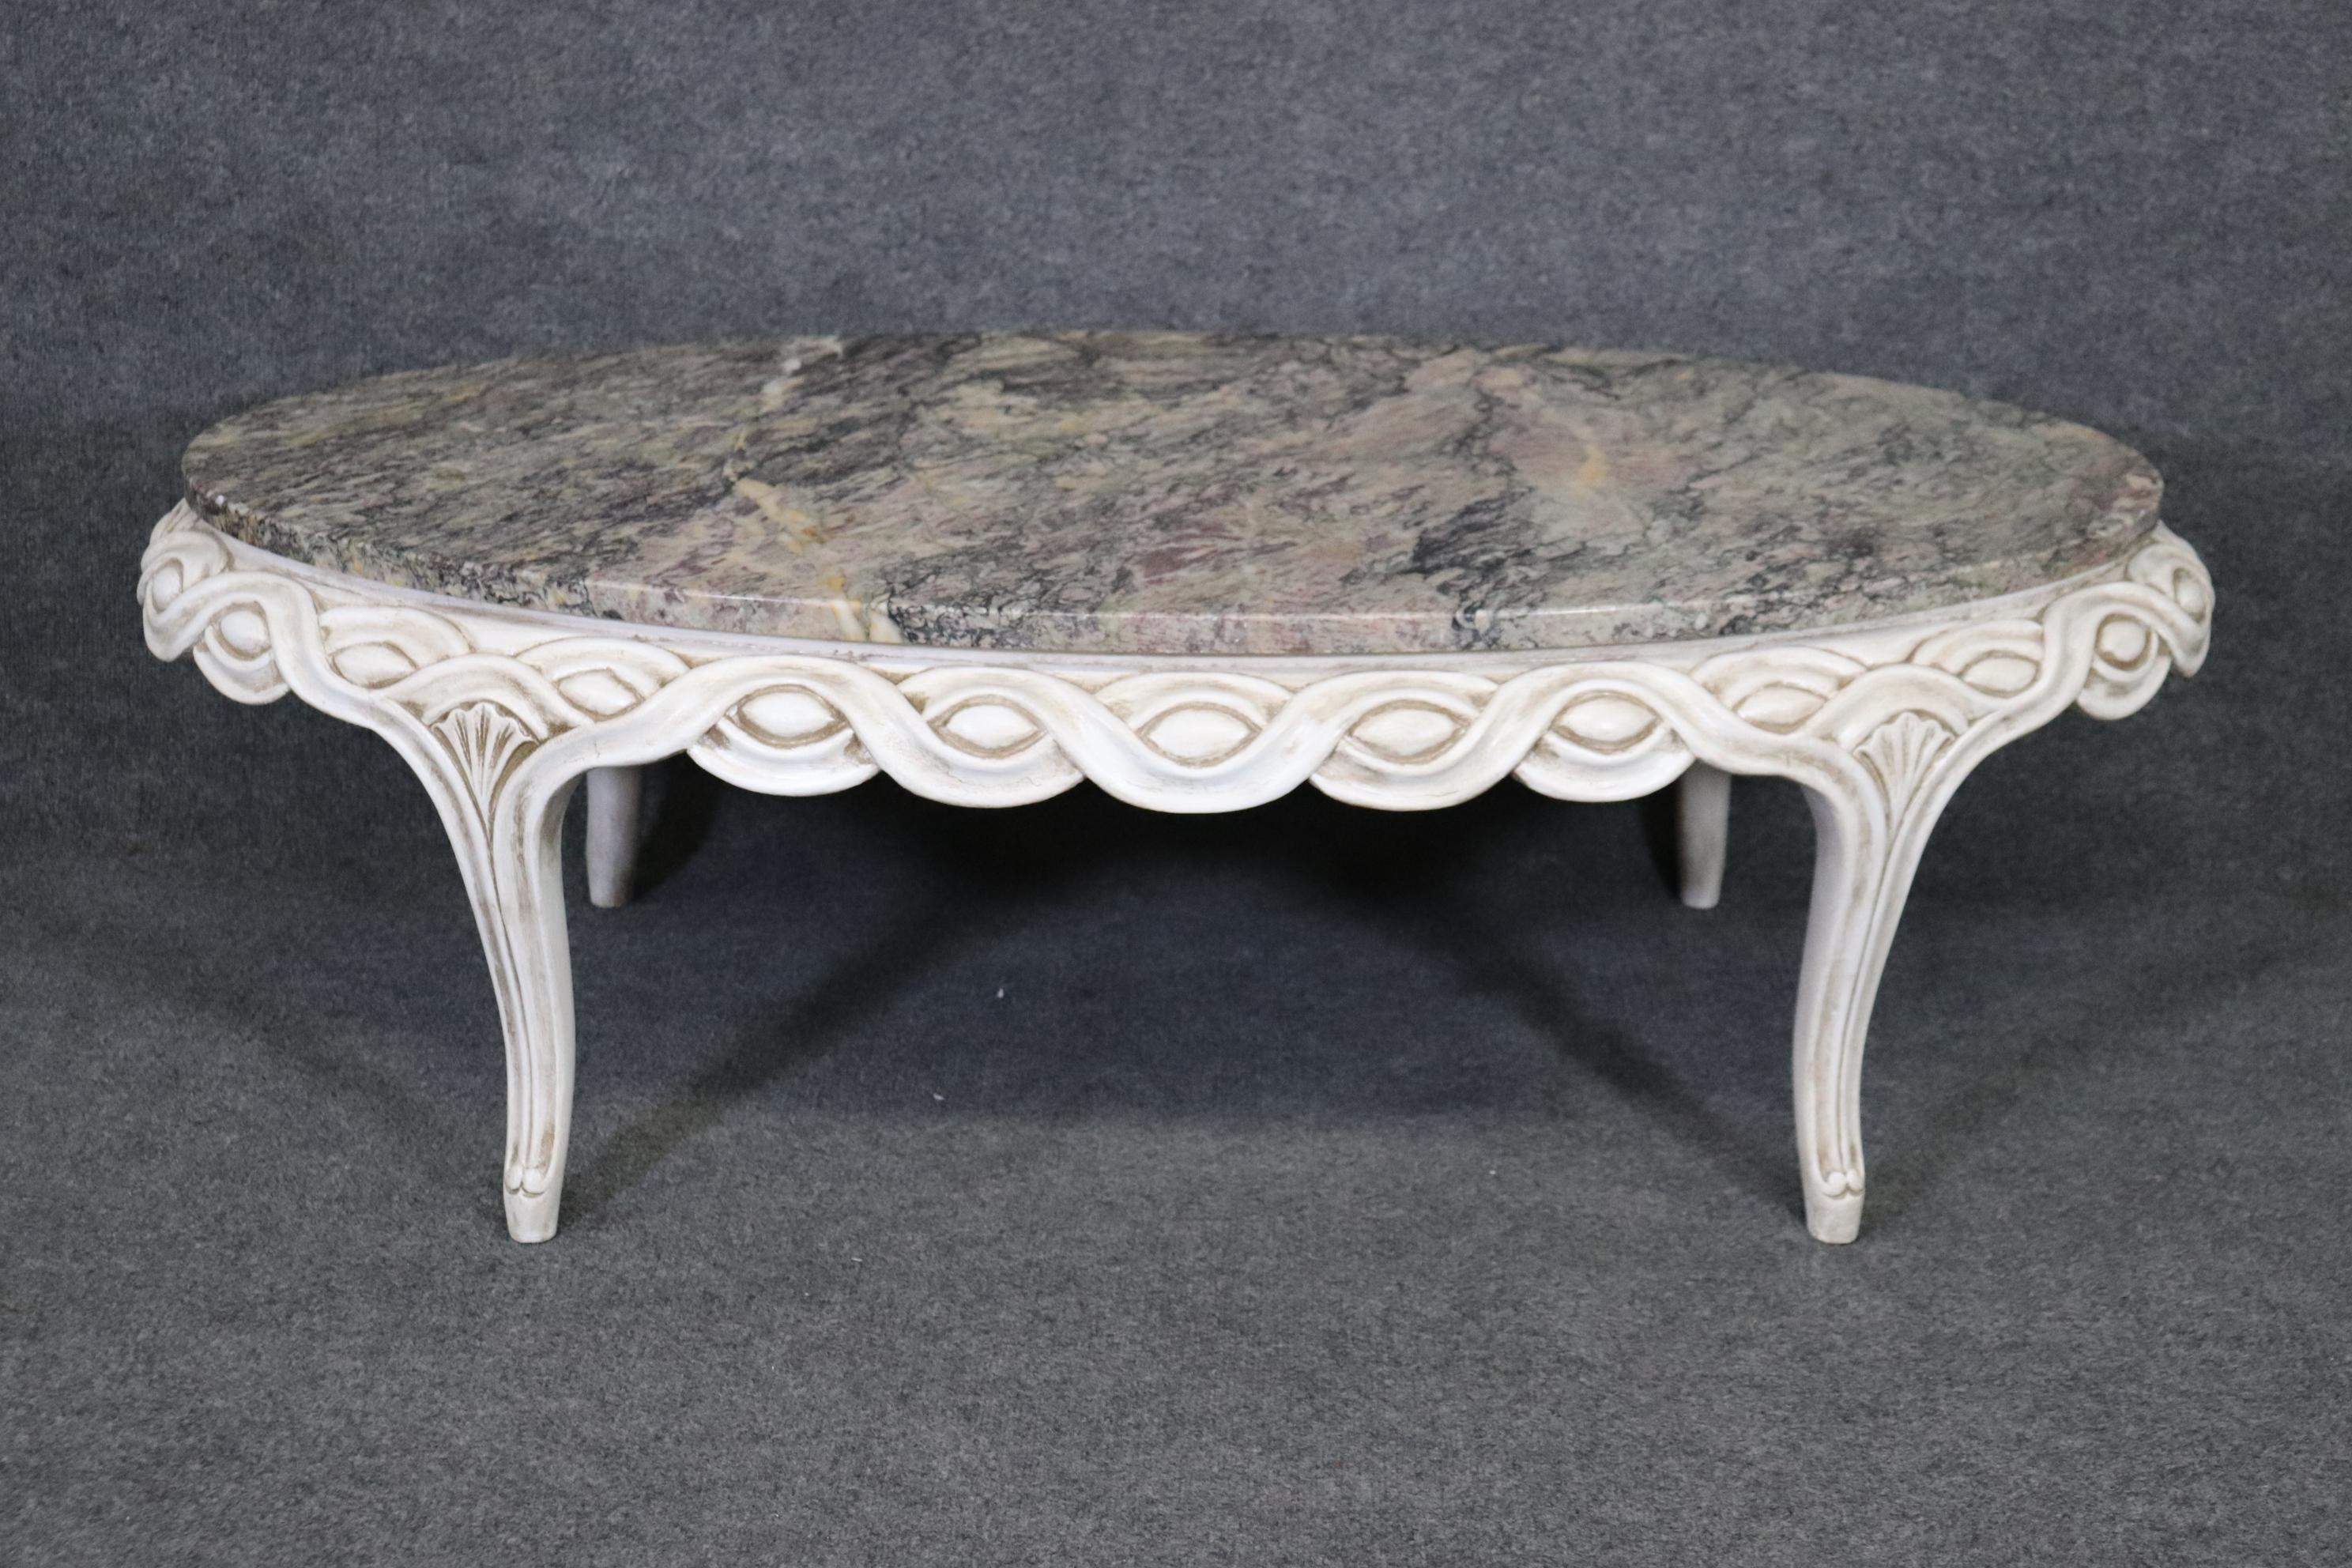 Dimensions- H: 17in W: 53in D: 28 1/2in 
This French Louis XV Style Paint Decorated Marble Top Coffee Table is made of the highest quality and is perfect for you and your home! If you look at the photos provided you will see the beautiful carved